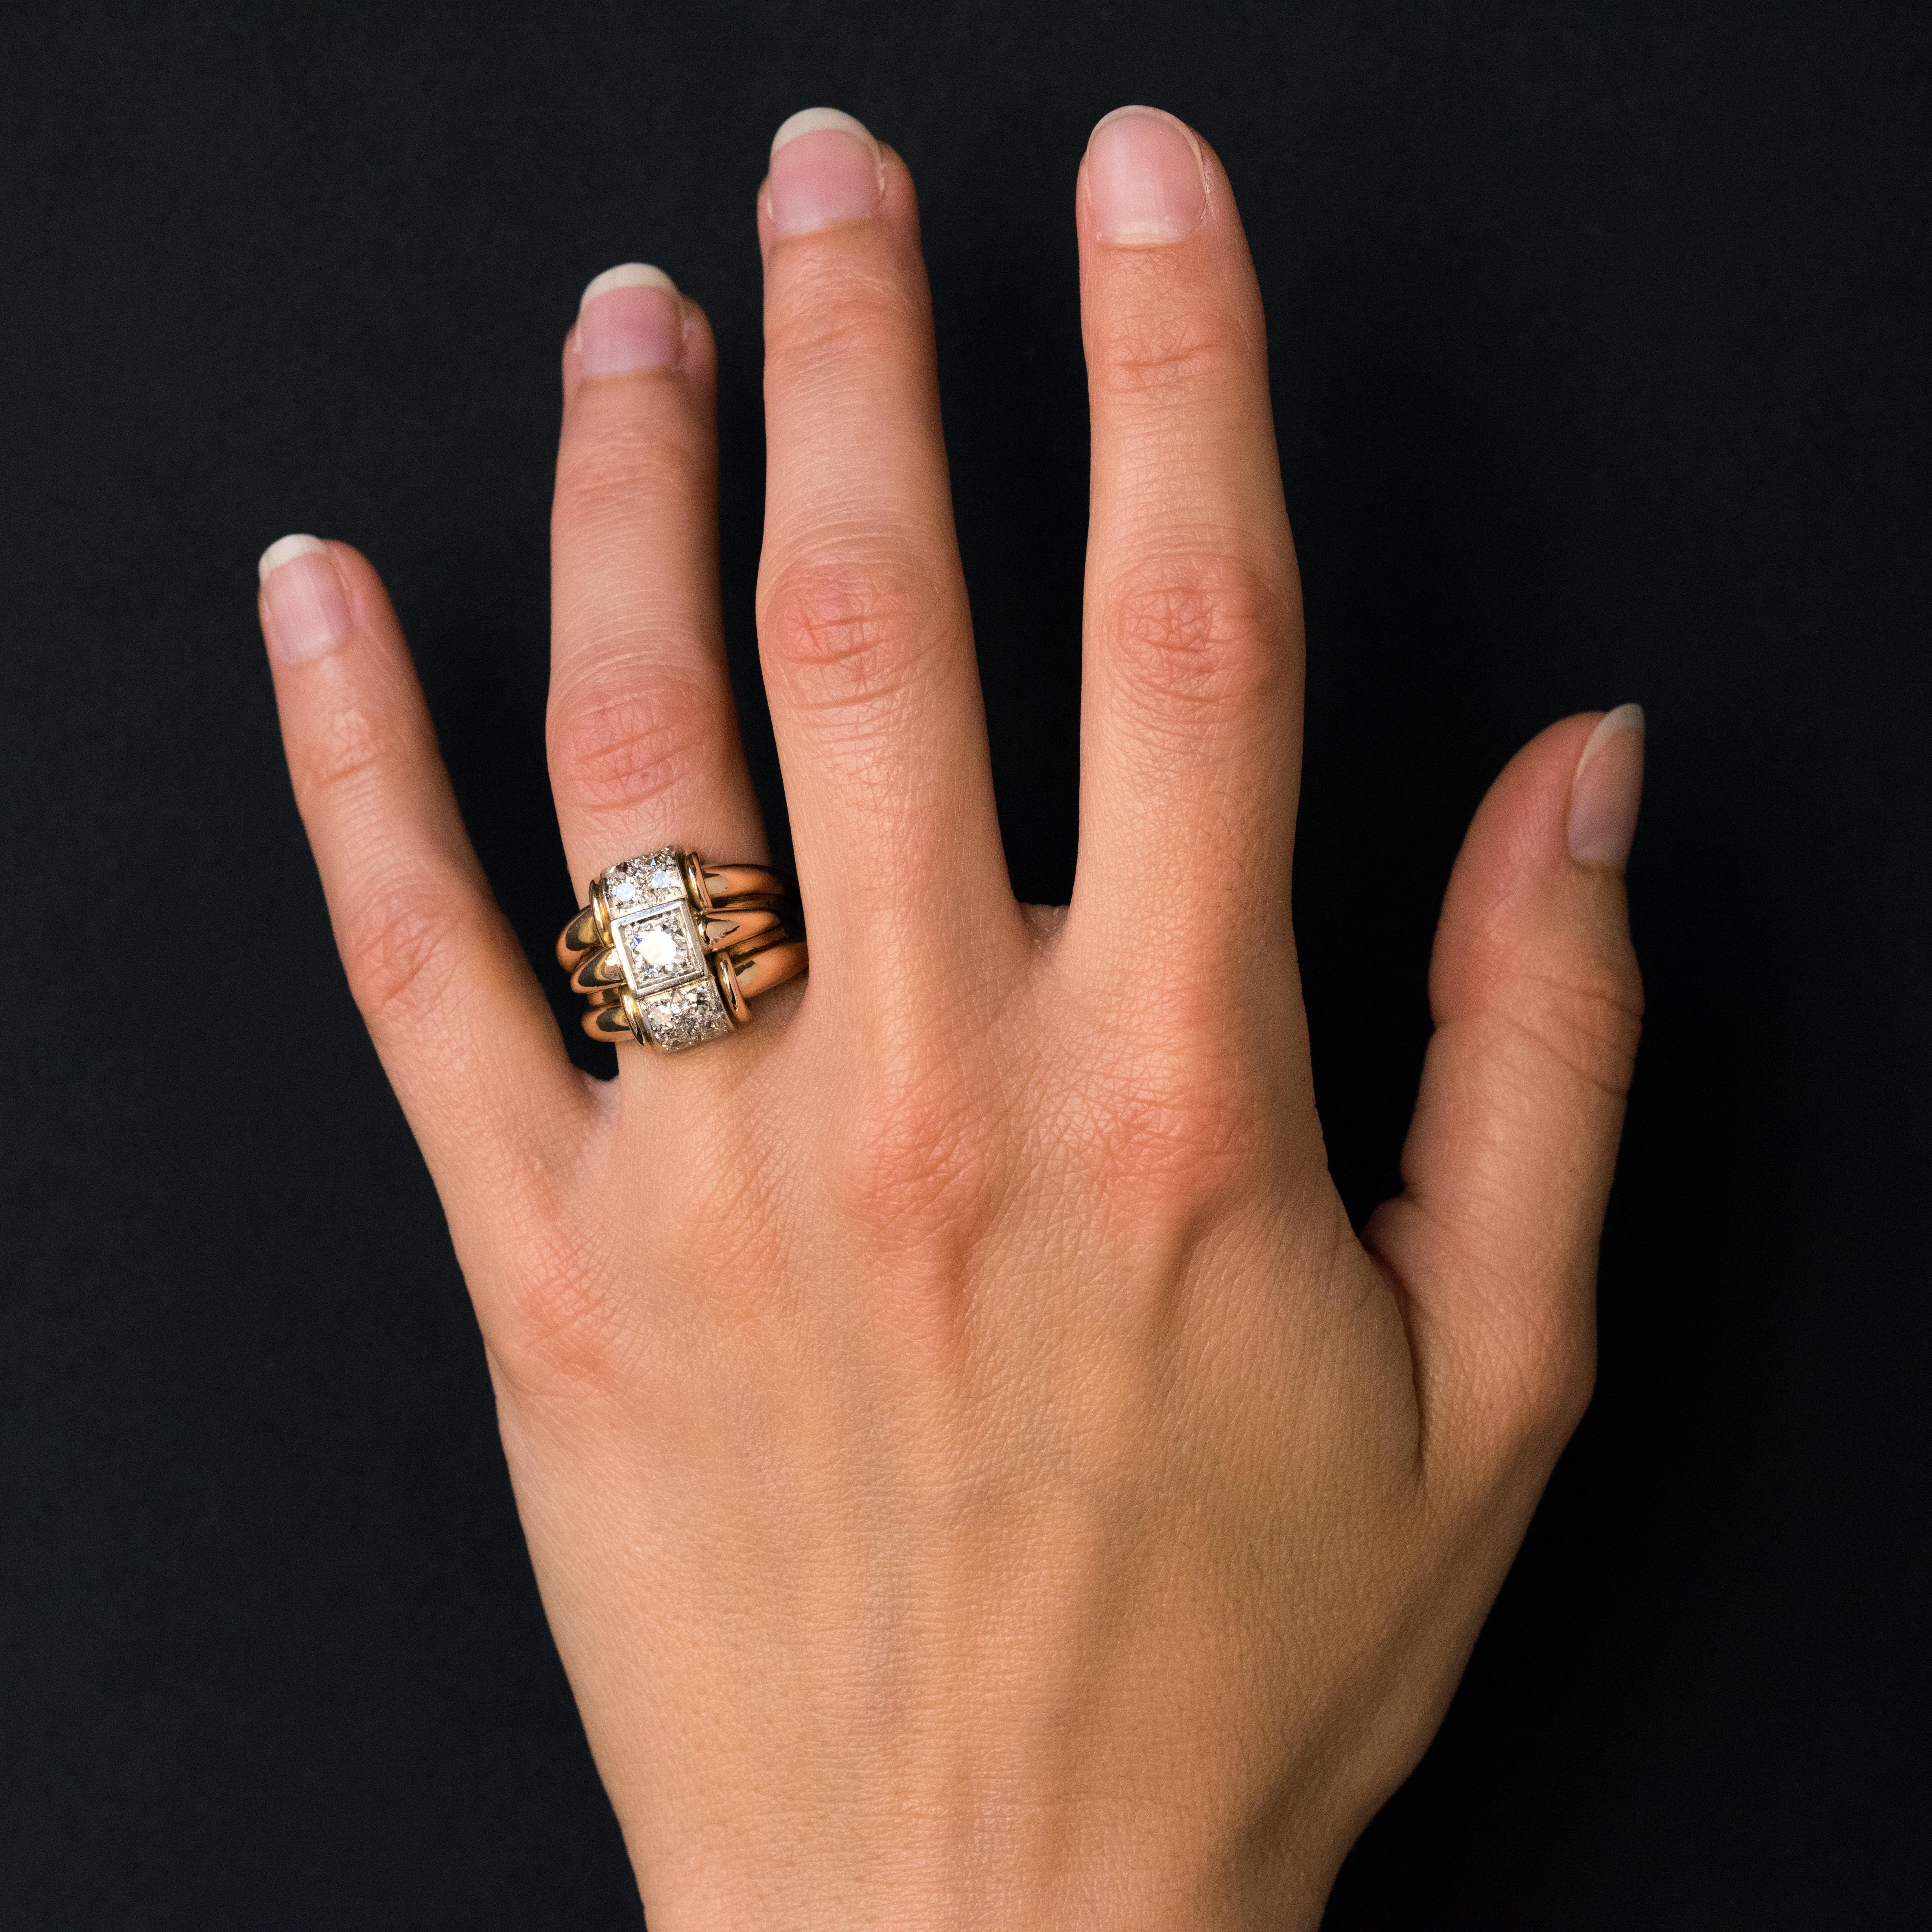 Ring in 18 karats yellow gold, and platinum.
With an ideal size, the top of this tank ring consists of 3 rings including the center one, raised, is adorned with an antique- brilliant- cut diamond. The other two rings are each set with 4 antique-